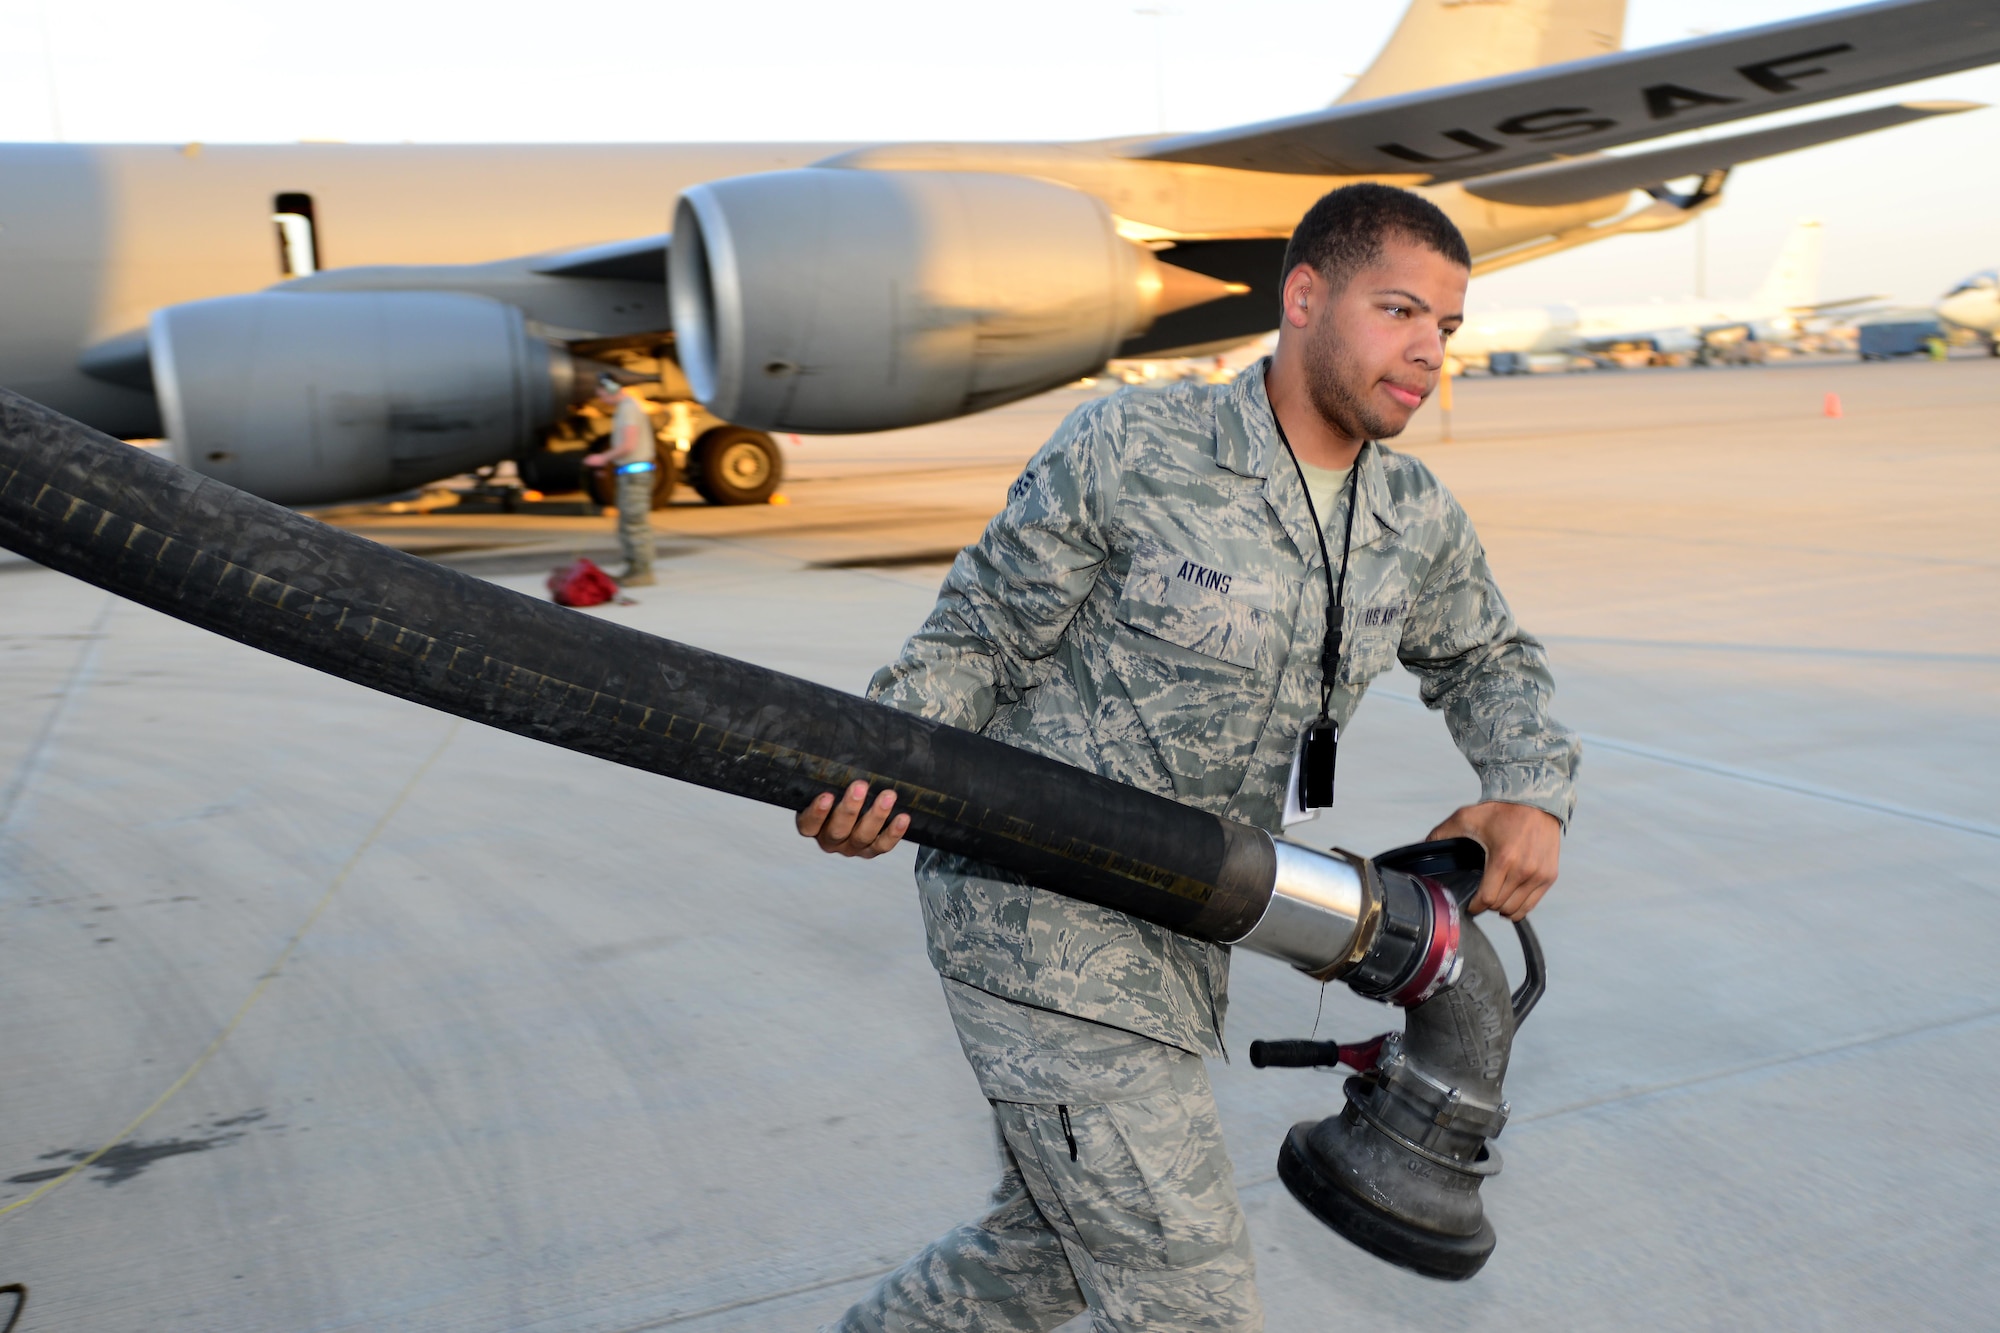 Airman 1st Class Jovonte Atkins, 379th Expeditionary Logistics Readiness Squadron fuels specialist extends a fuels hose from a R-12 refueler to refuel an aircraft at Al Udeid Air Base, Qatar, Feb. 5, 2015. Since 2001, the 379th ELRS fuels flight has delivered more than three billion gallons of aviation and ground fuel in support of operations Enduring Freedom and Iraqi Freedom. (U.S. Air Force photo by Master Sgt. Kerry Jackson)   